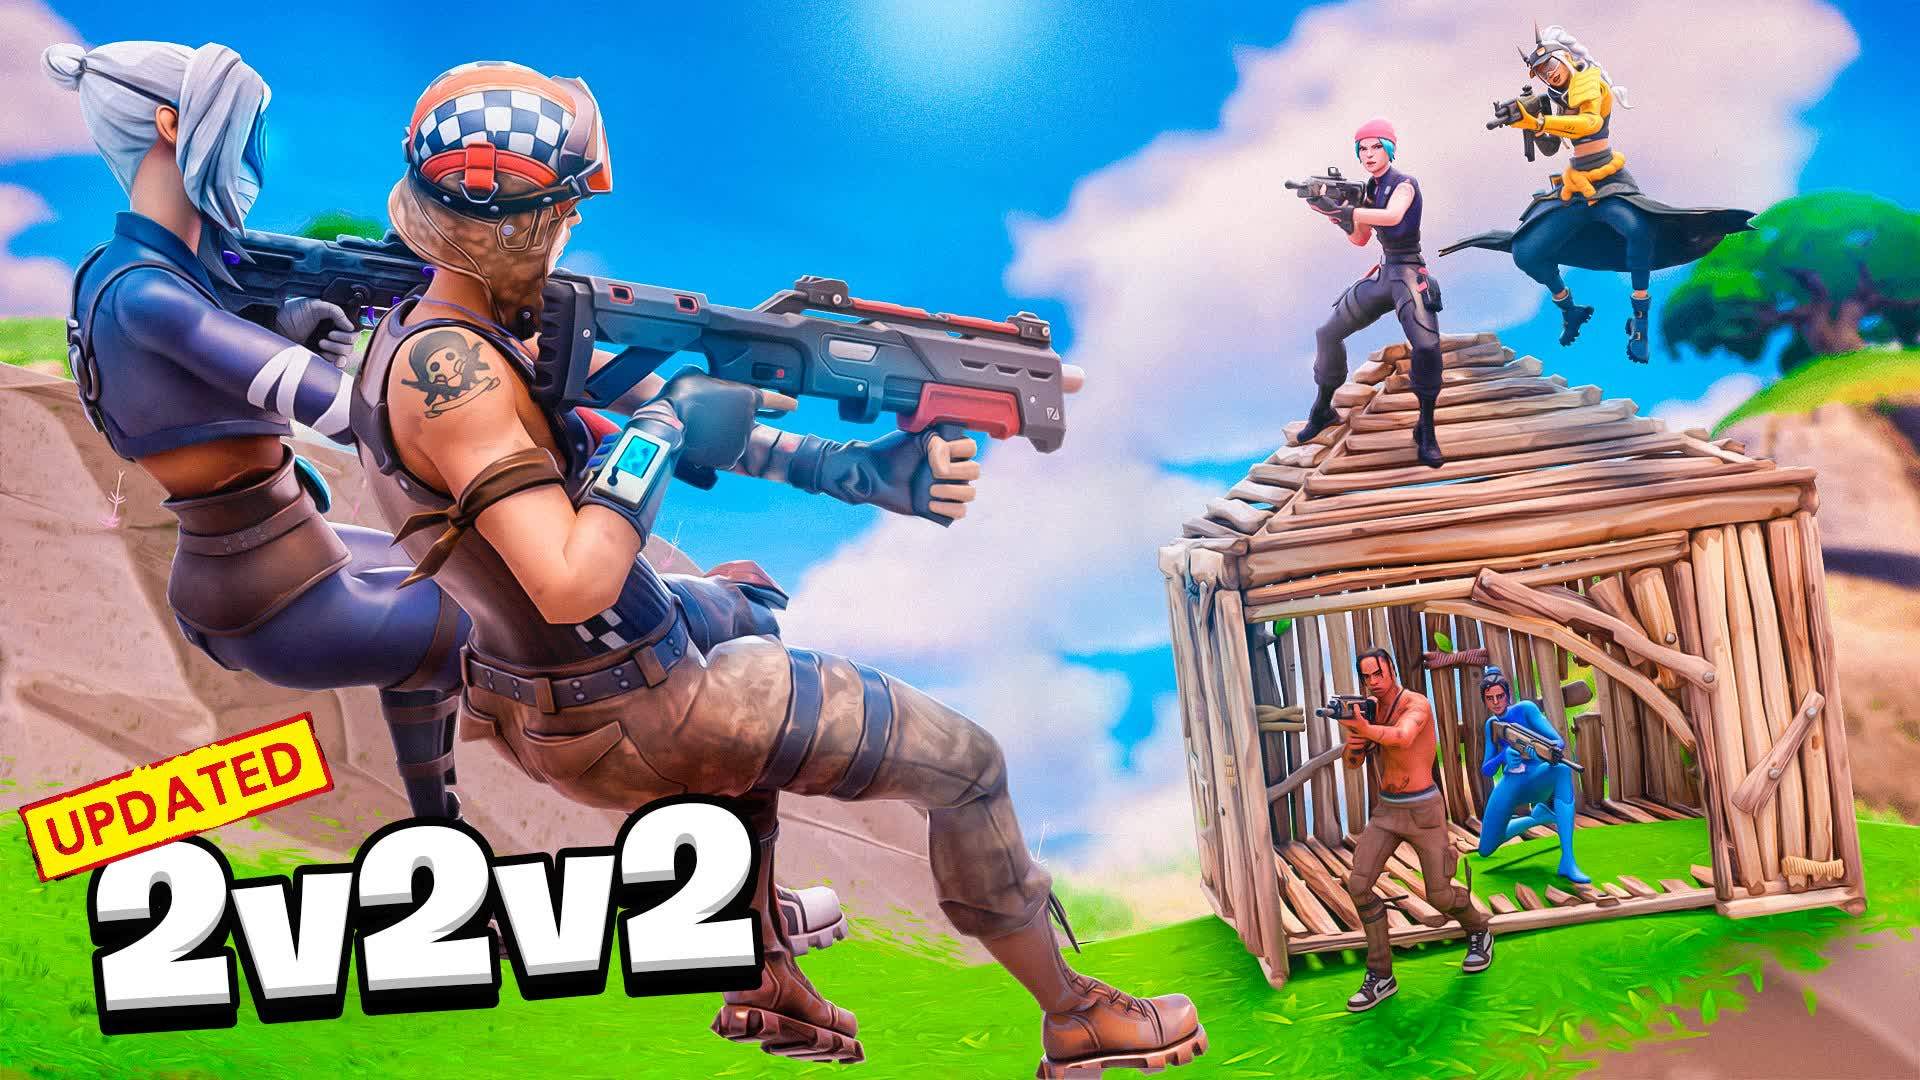 UPDATED Third Party Practice 2v2v2